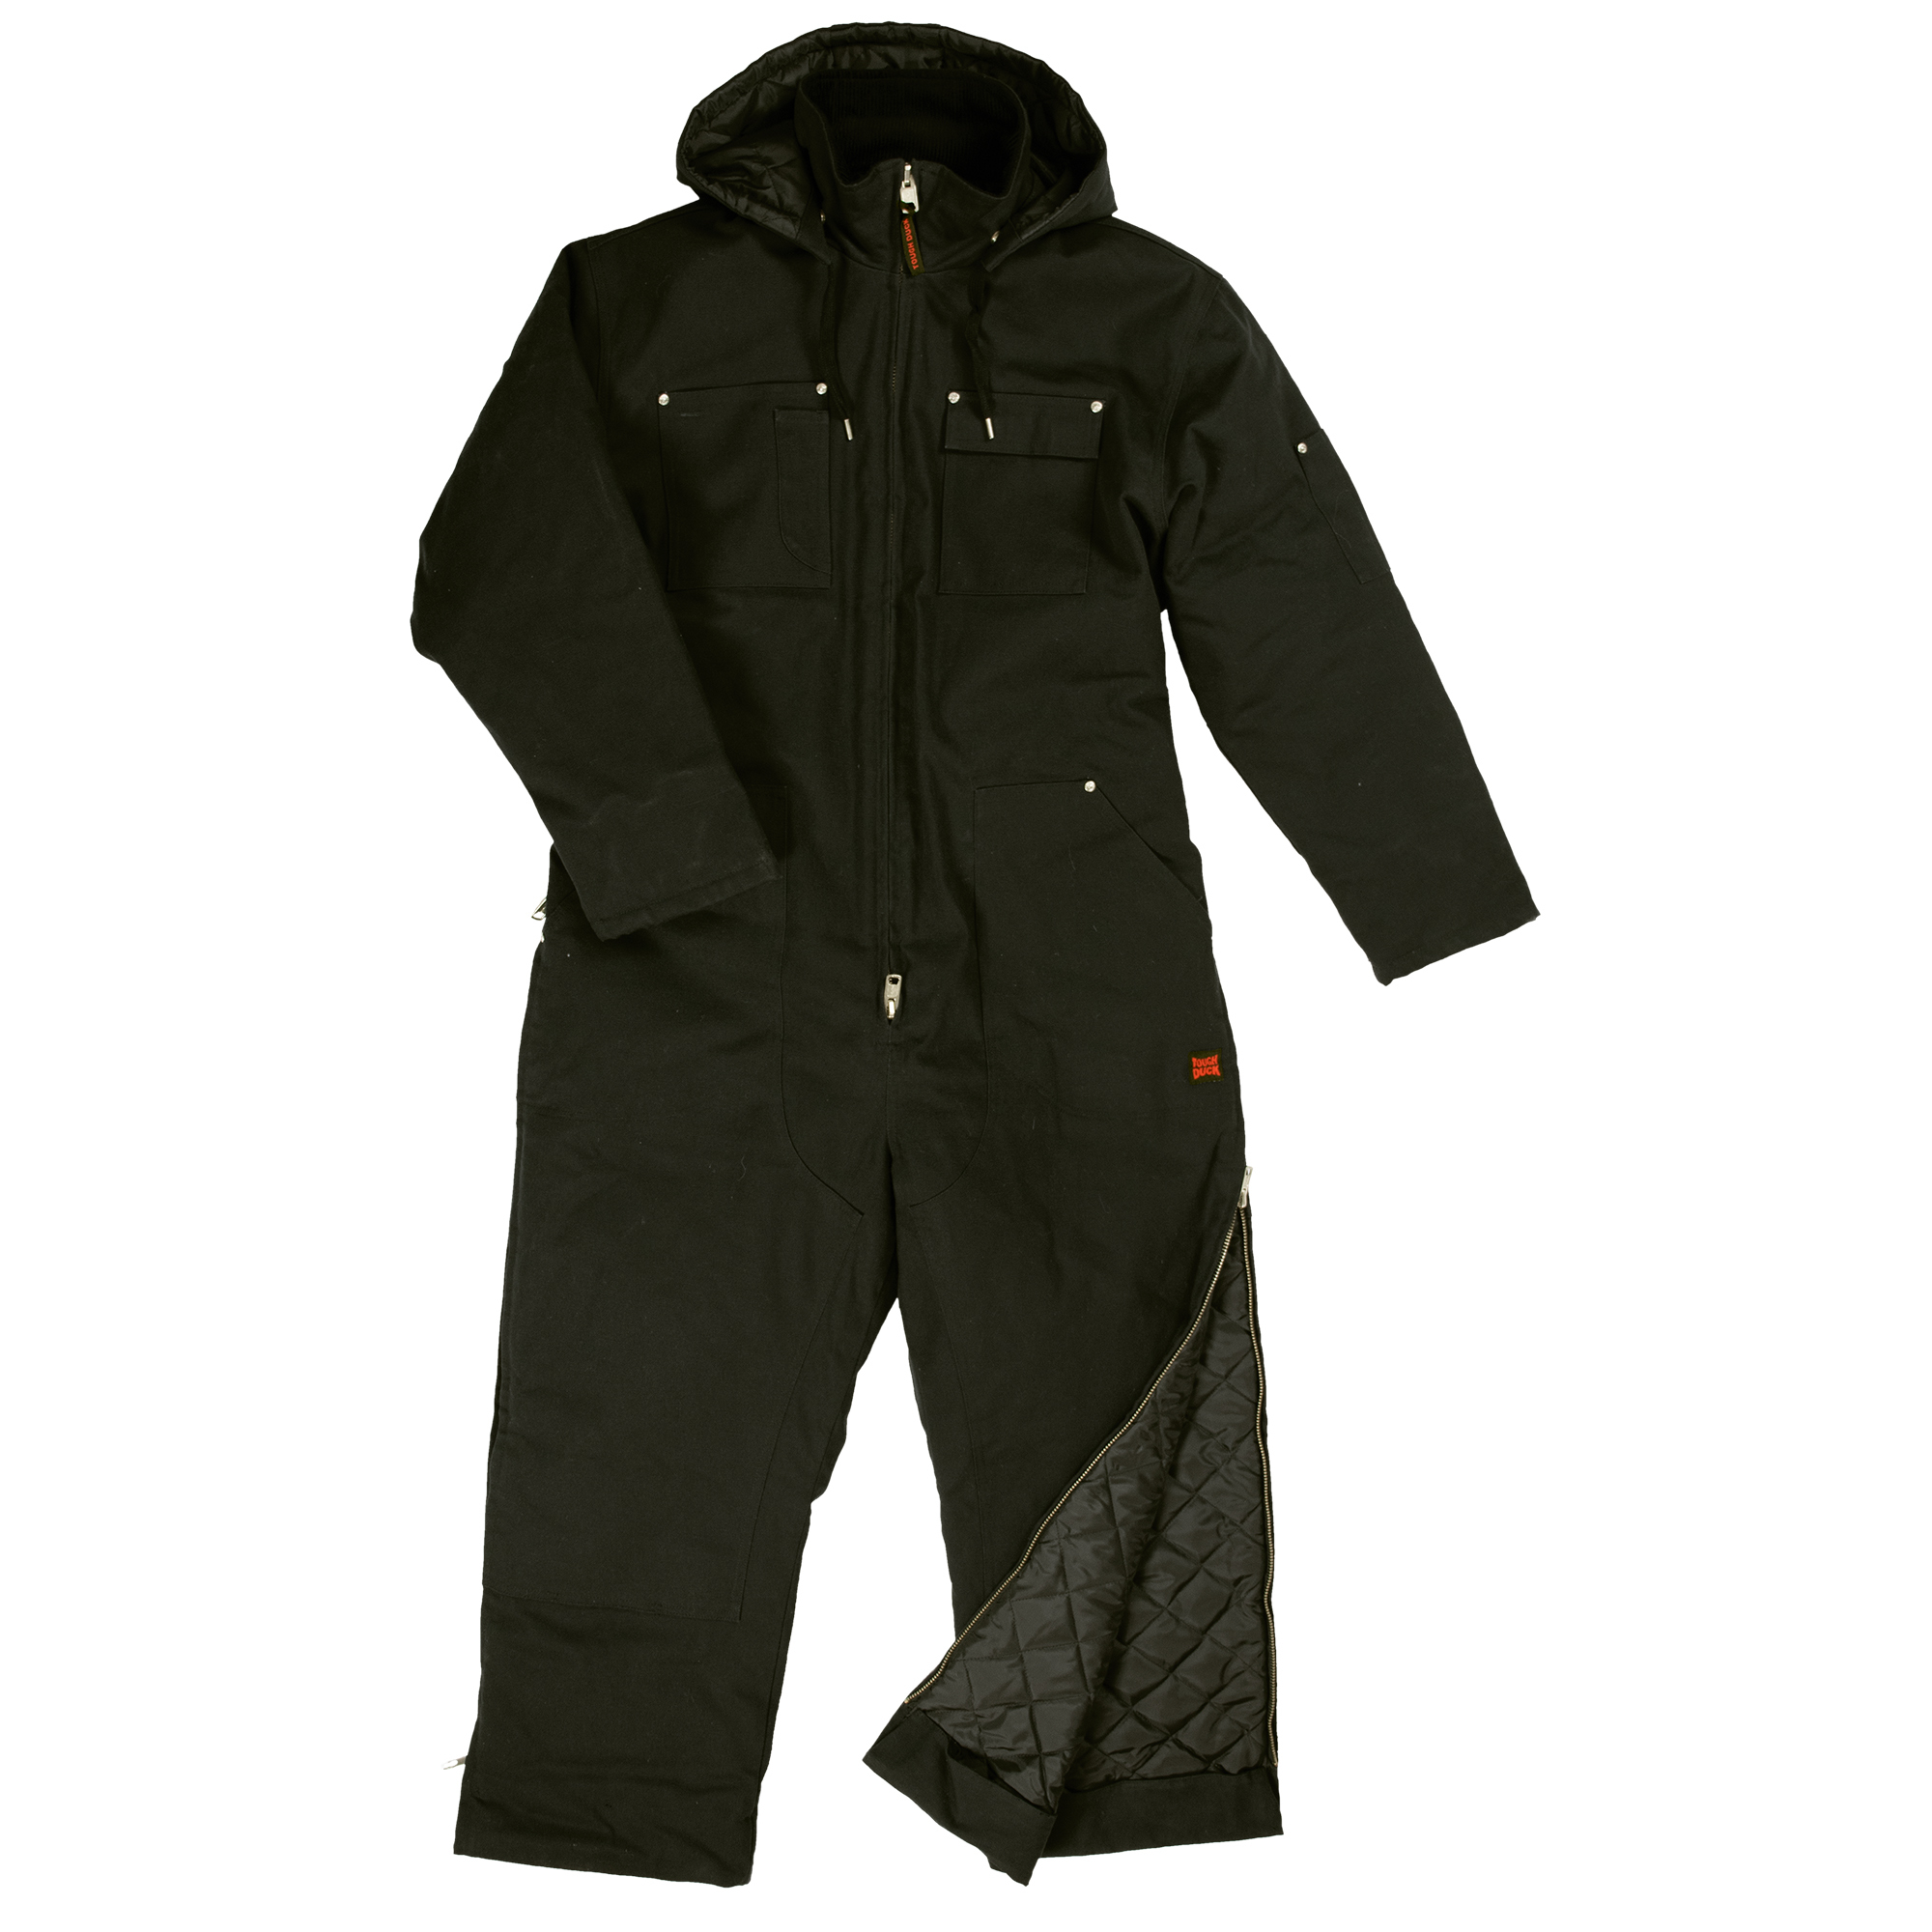 Tough Duck, Insulated Duck Coverall, Size M, Color Black, Model WC011